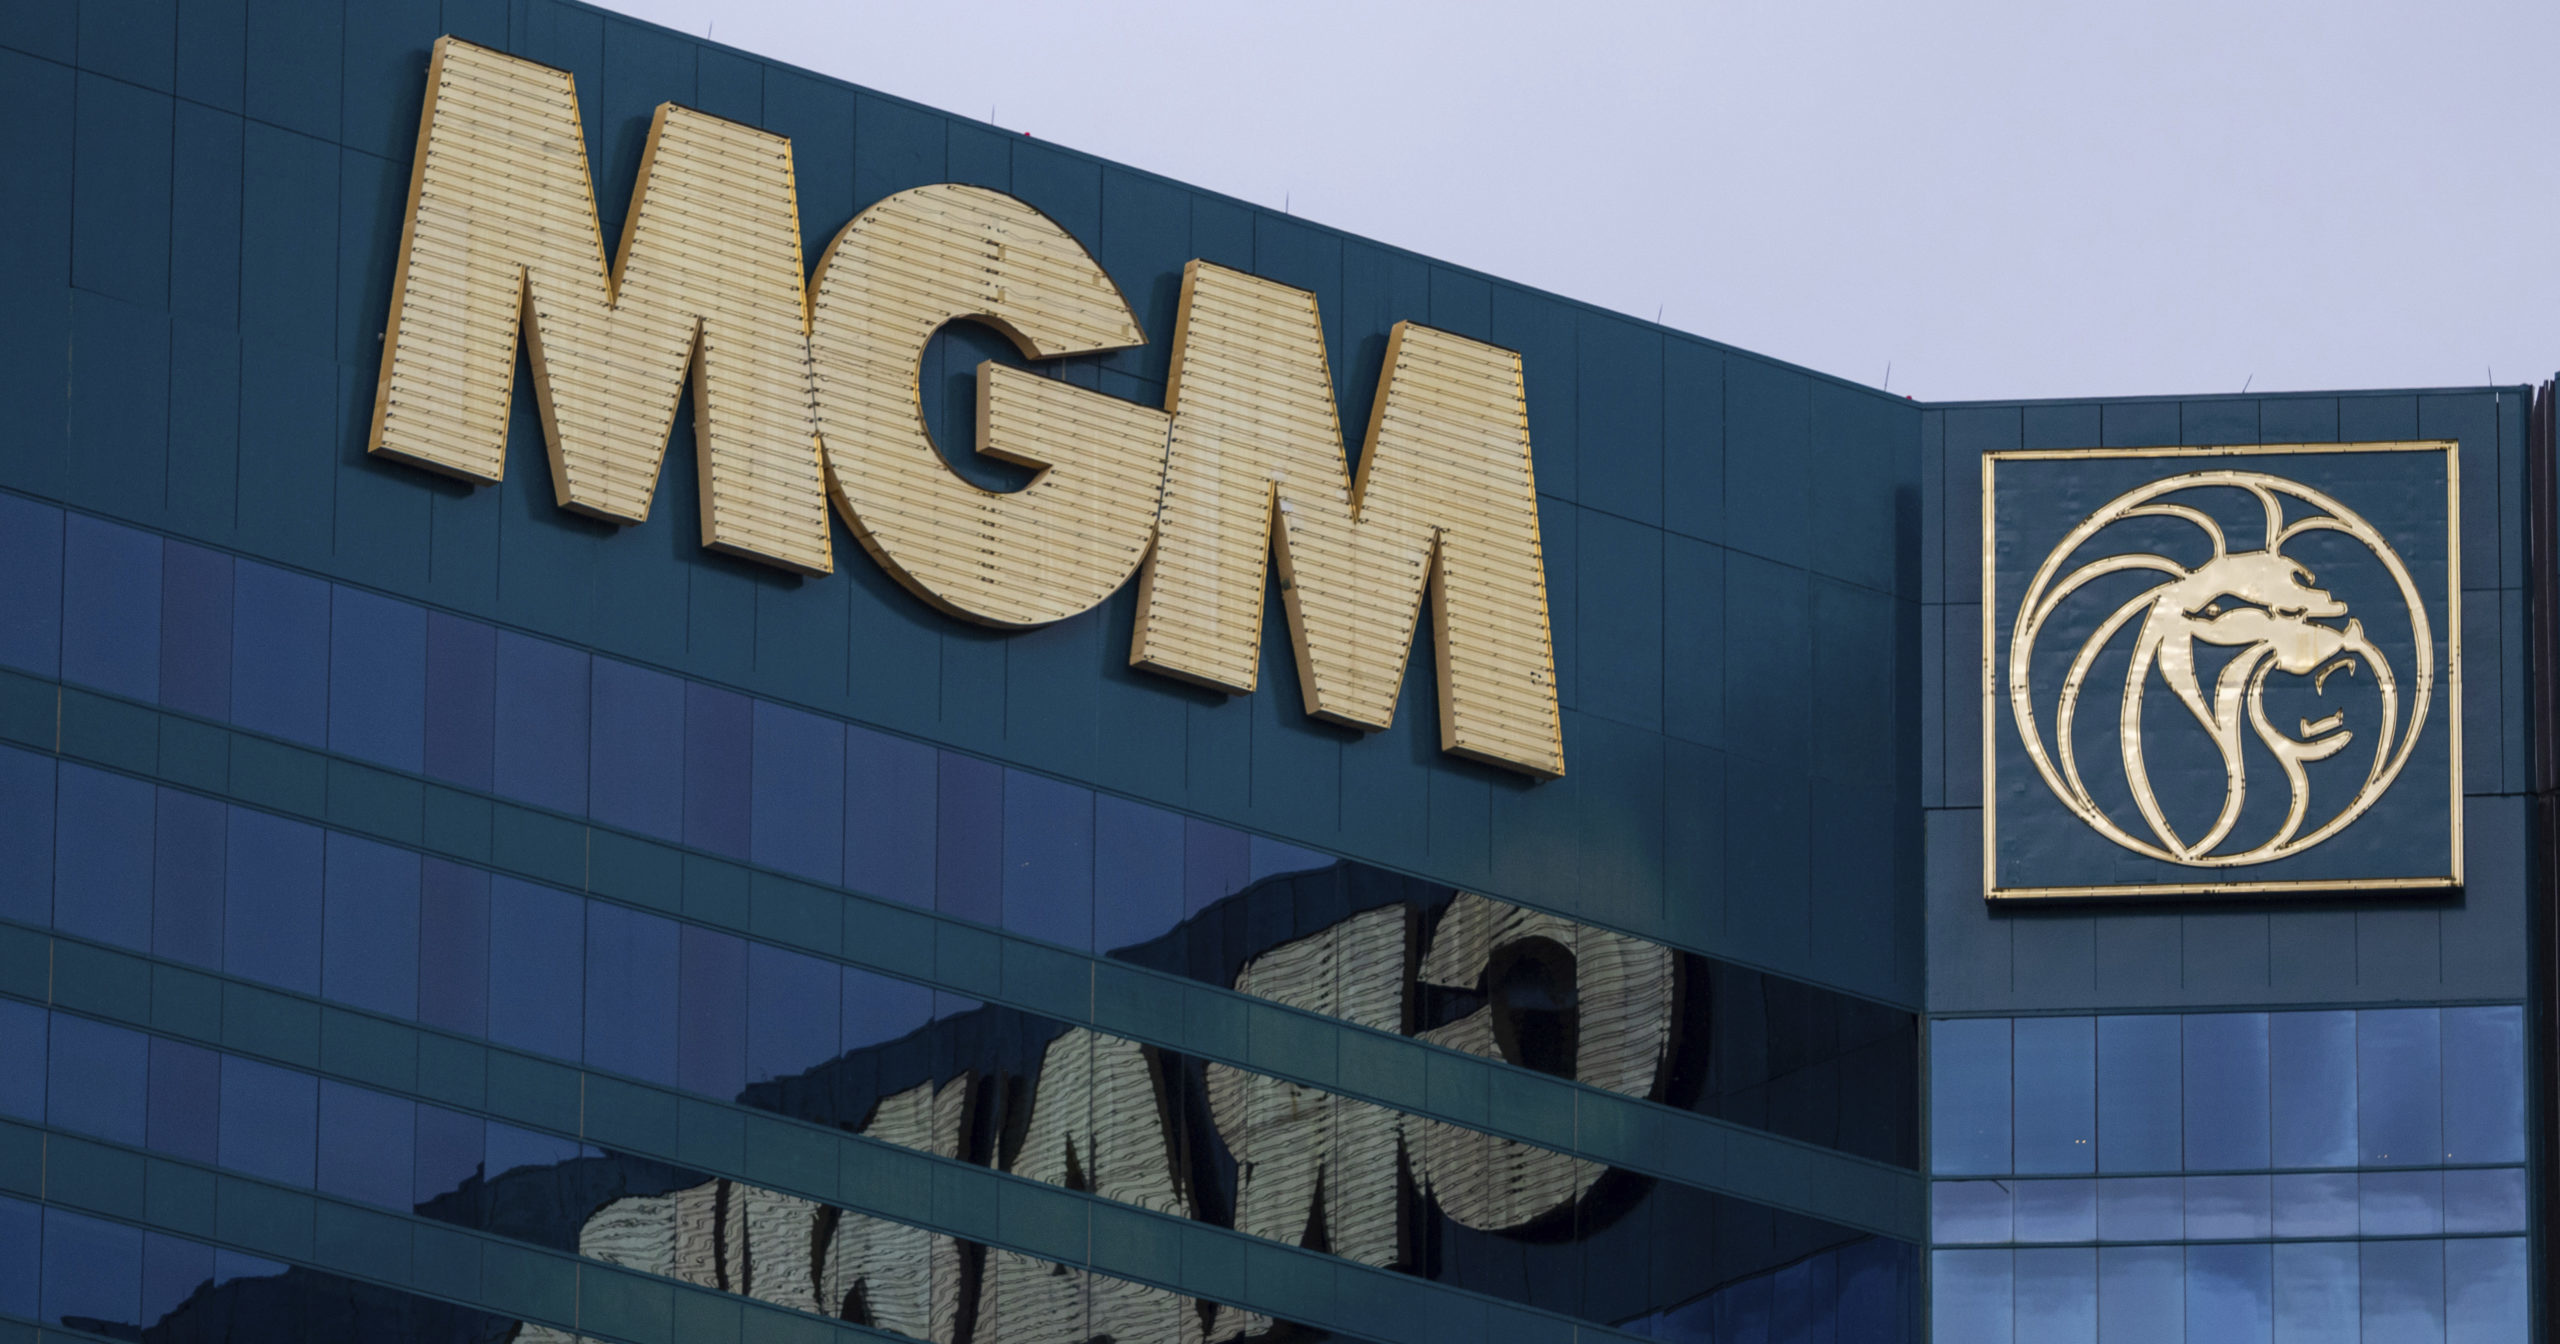 The exterior of the MGM Grand hotel and casino is seen on Sept. 20 in Las Vegas.